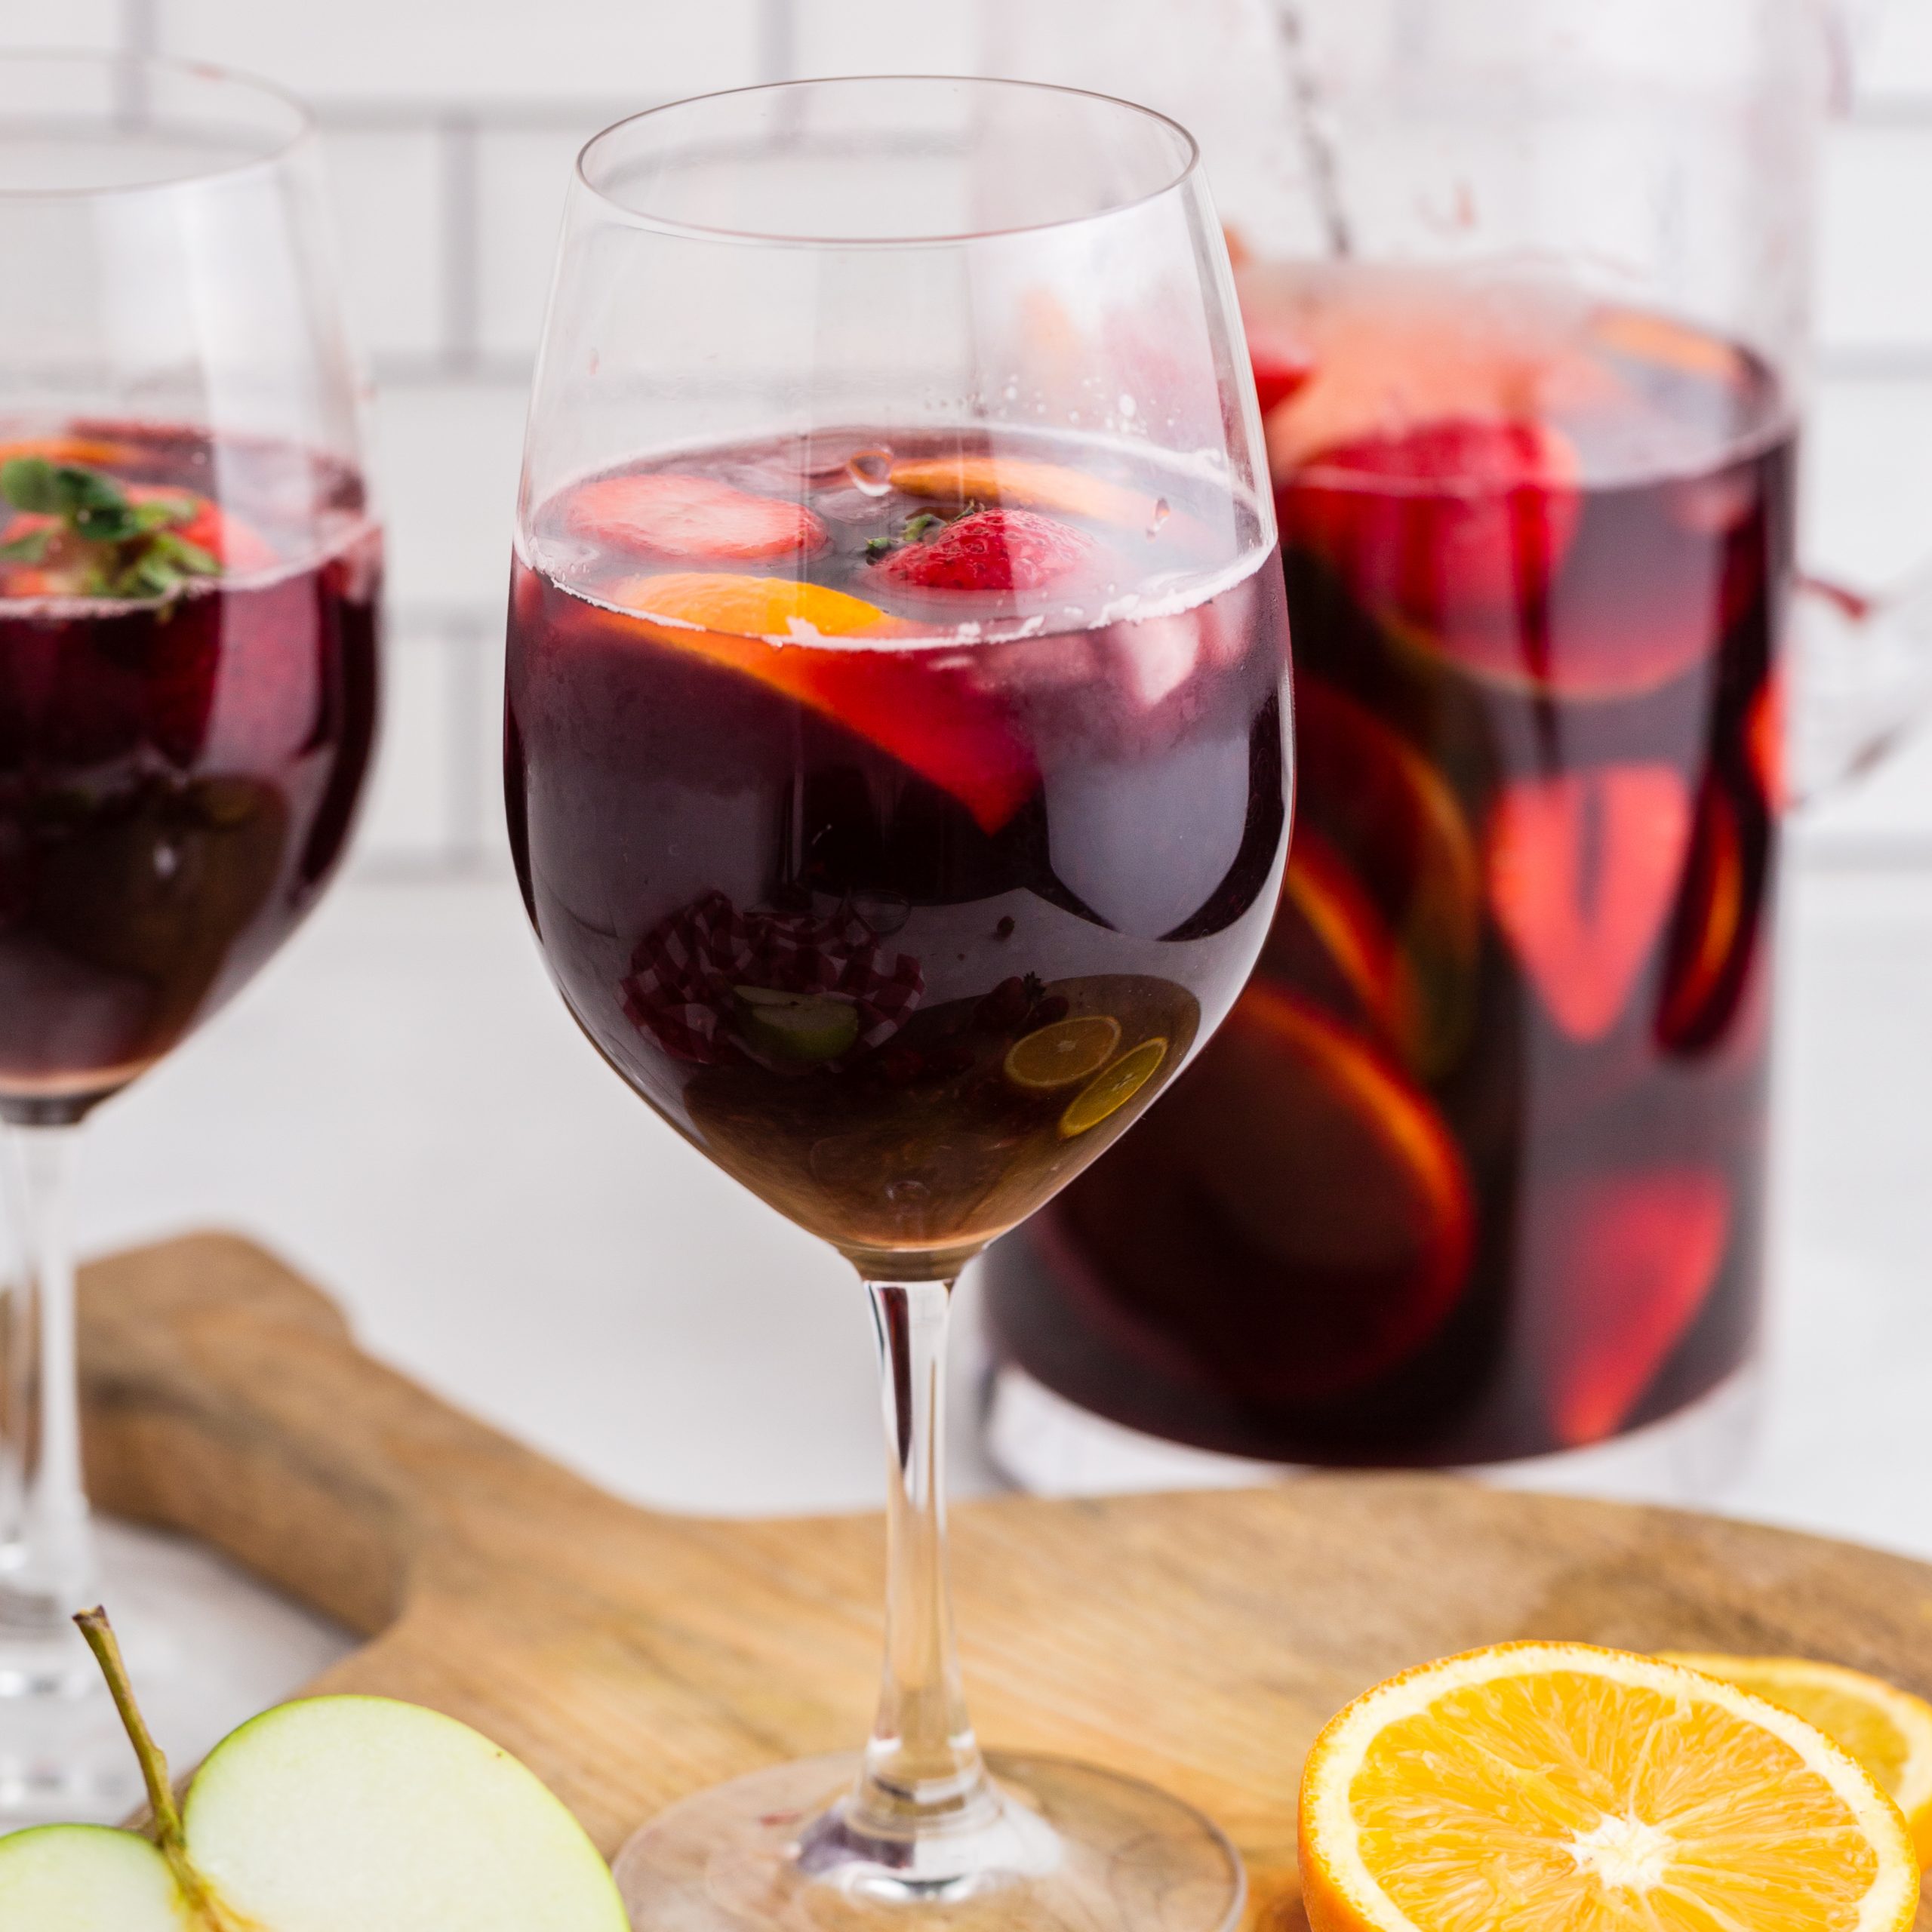 red wine sangria in wine glasses with pitcher in background and sliced apples and oranges on cutting board